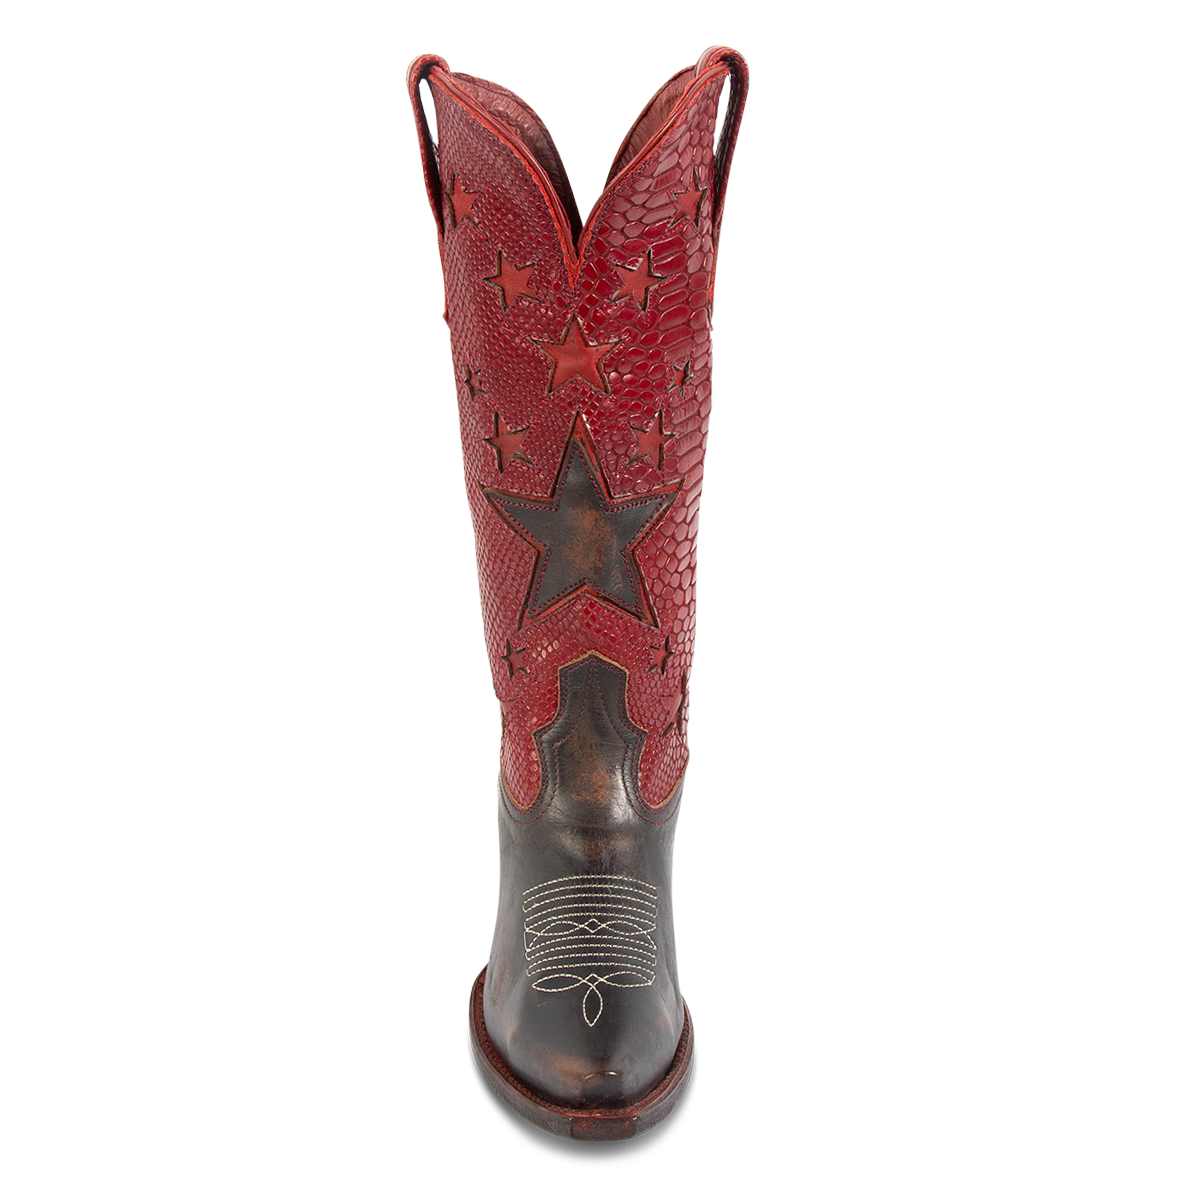 Front view showing two-toned star inlay detailing and front toe stitching on FREEBIRD women's Starzz red western boot